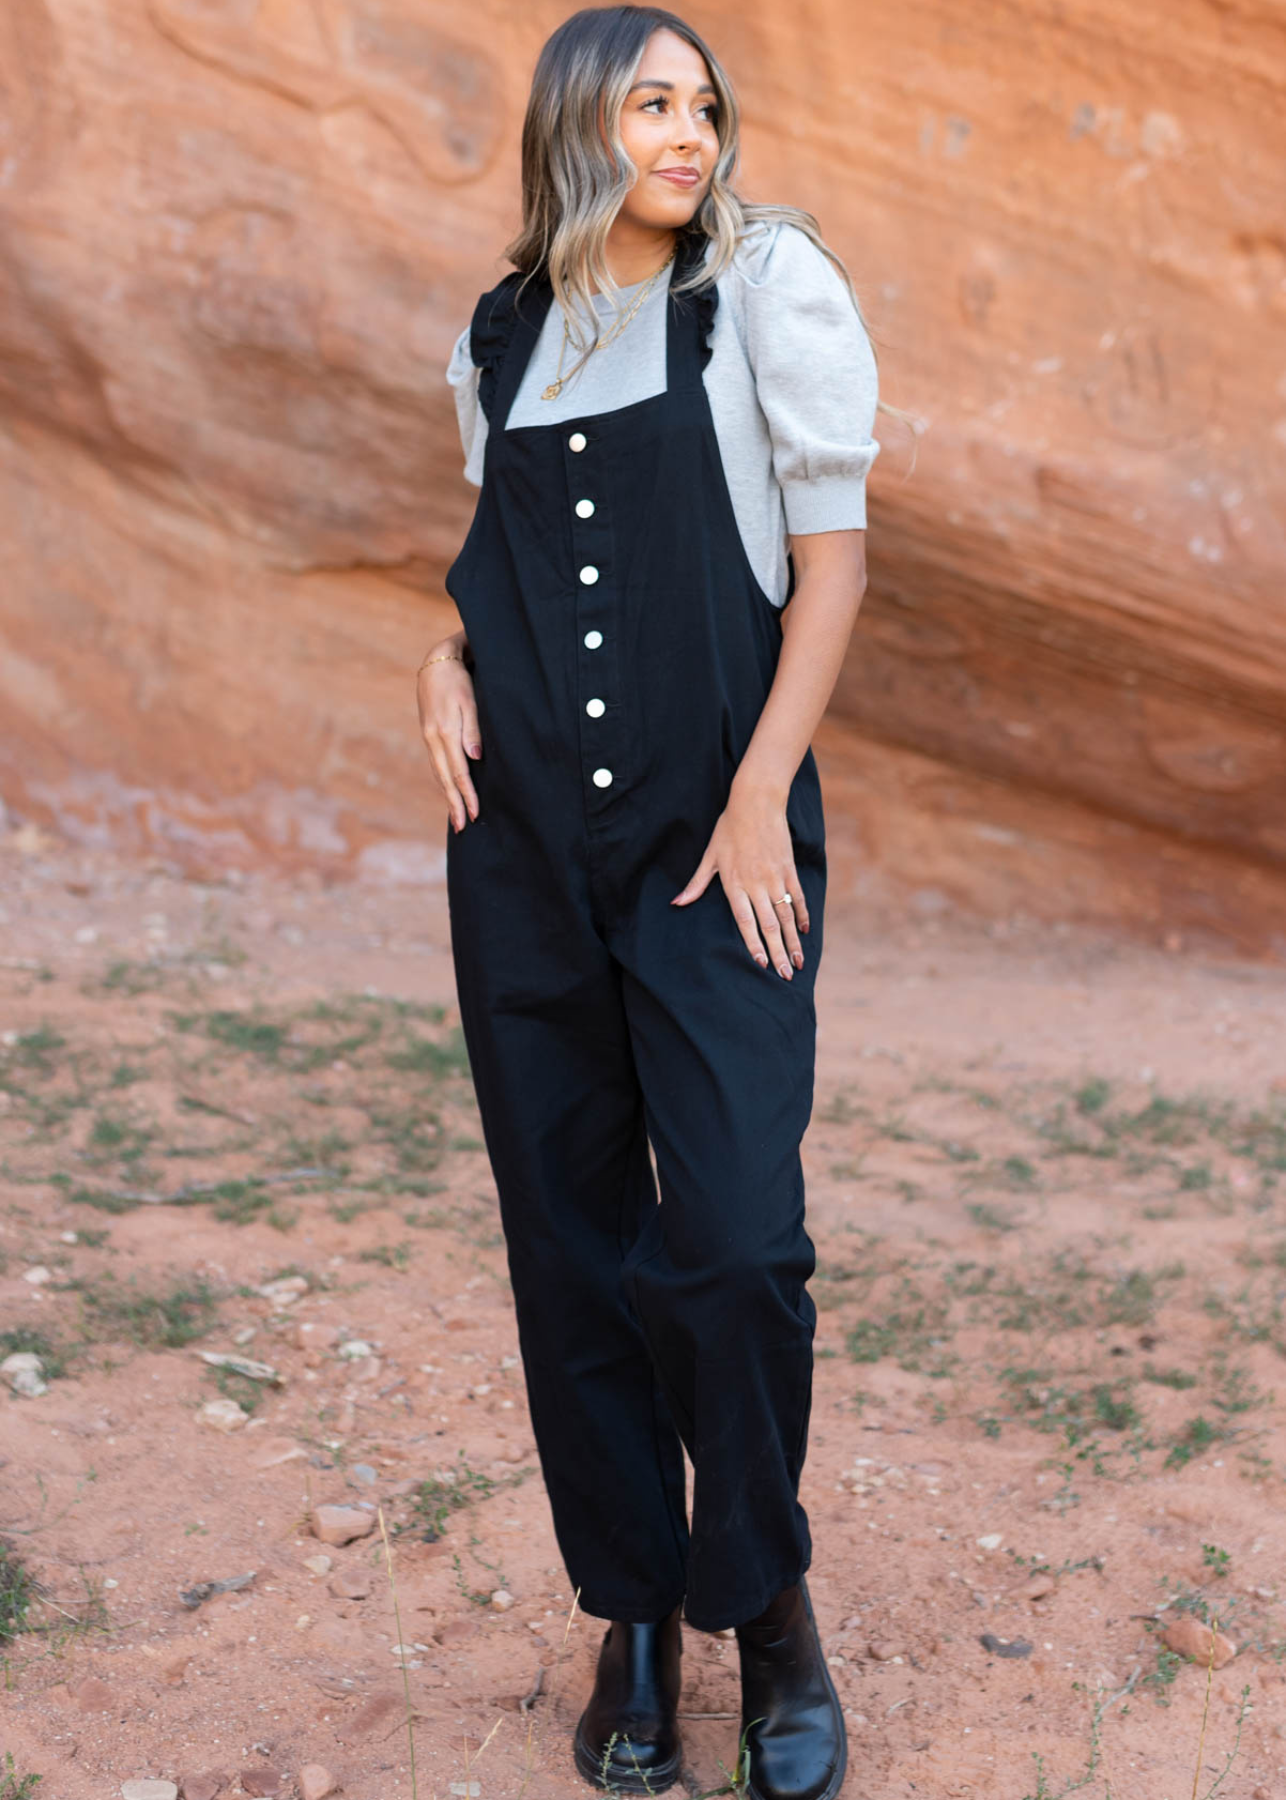 Black jumpsuit with white buttons and ruffle straps